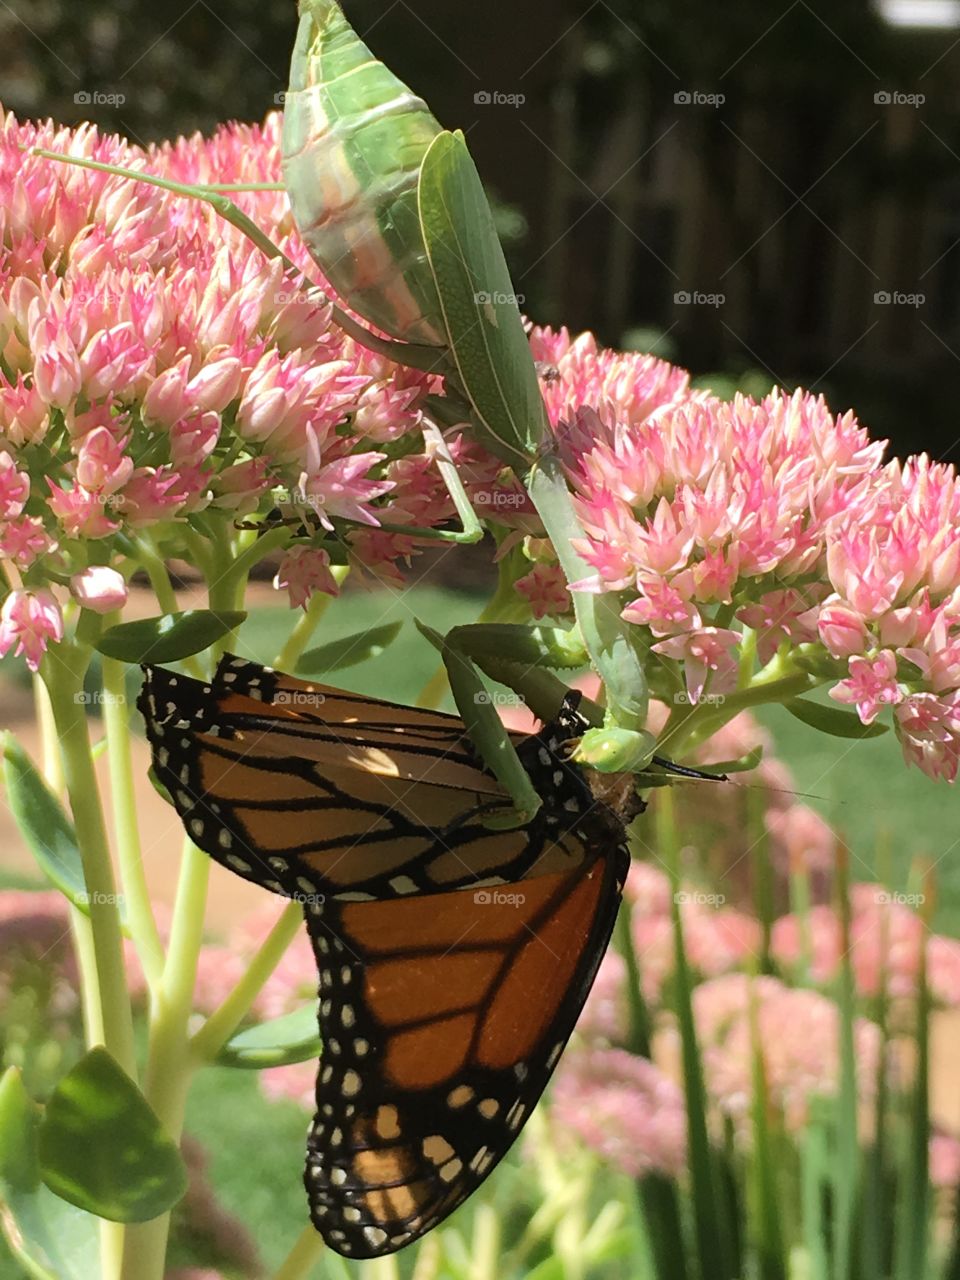 A praying mantis eating a butterfly.